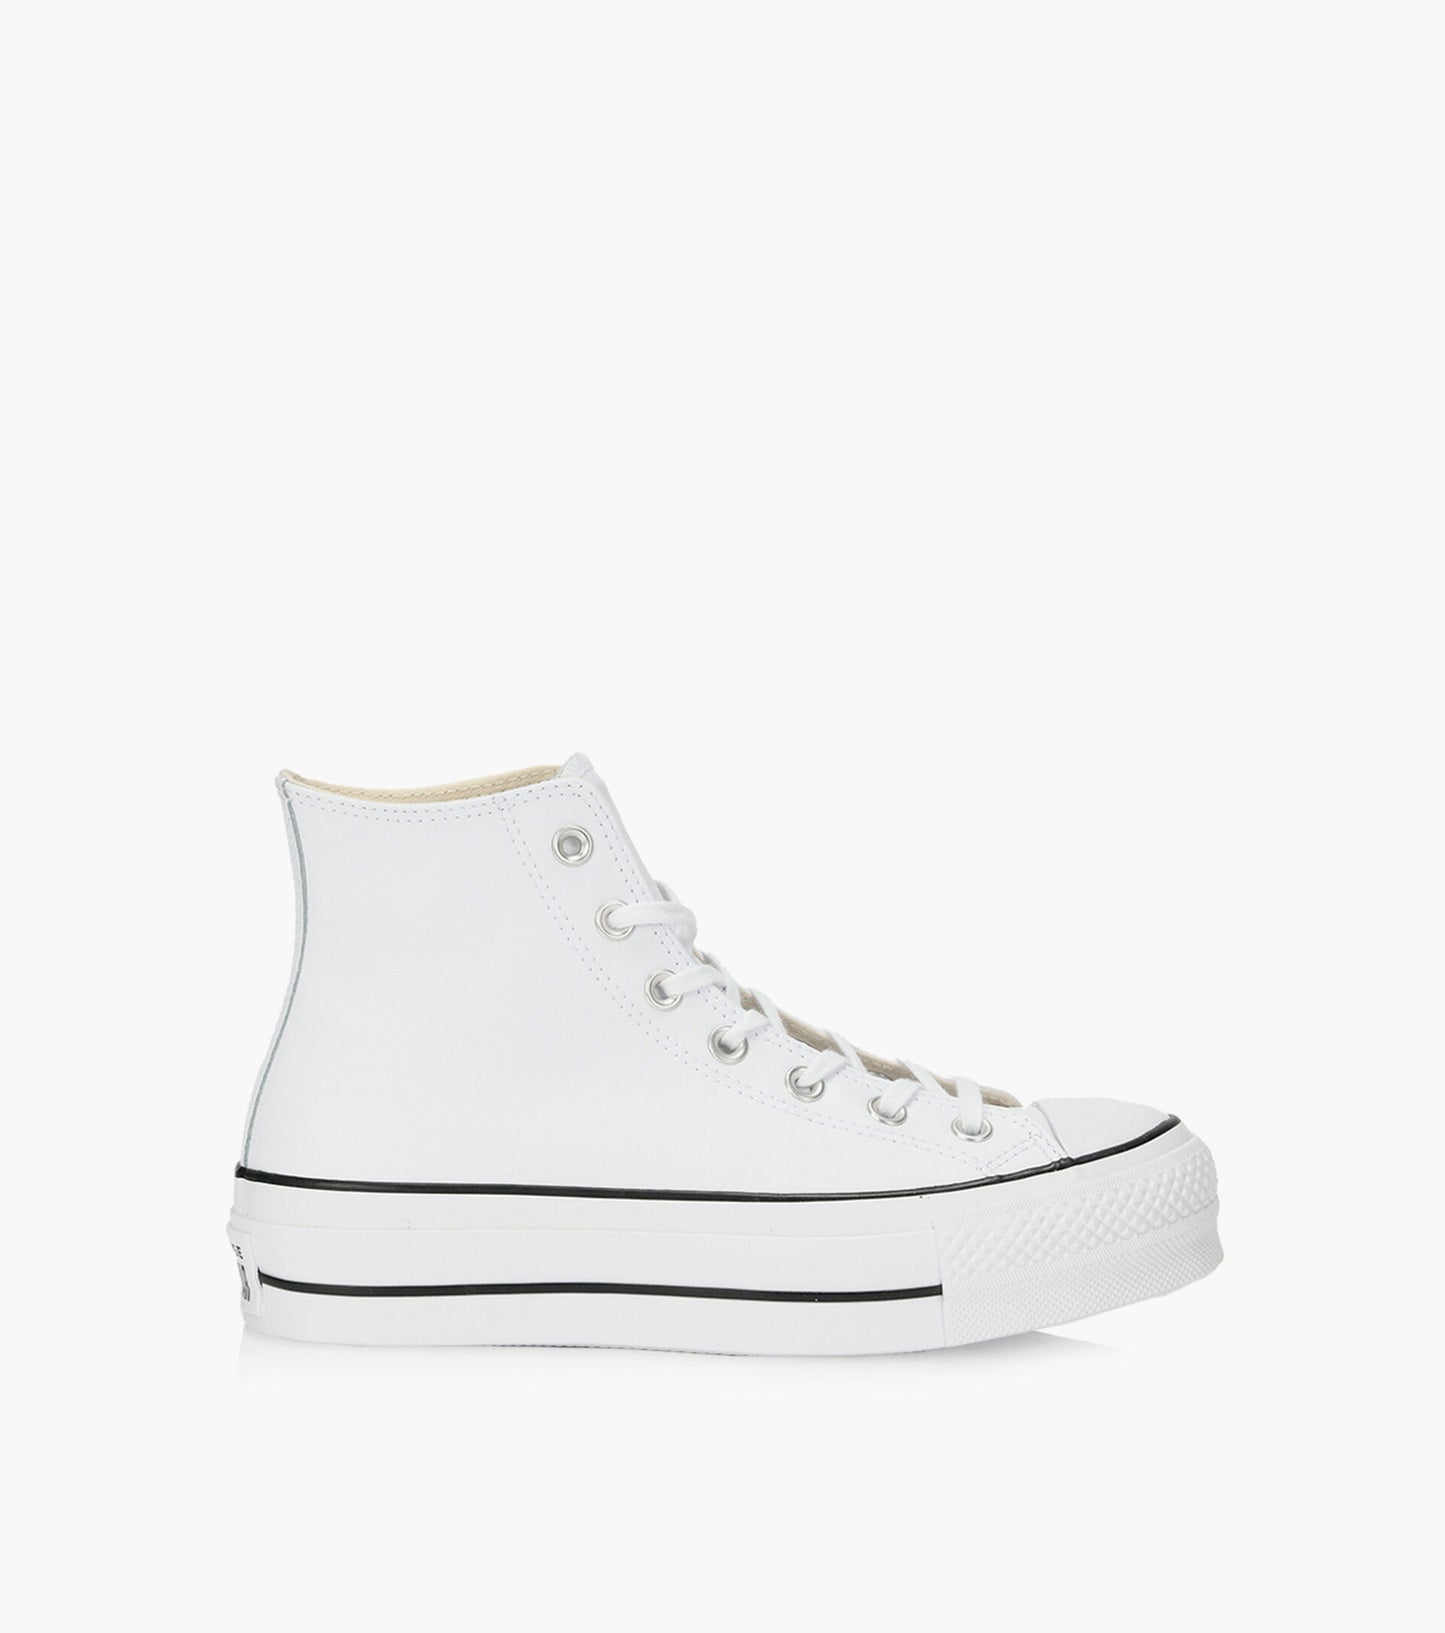 Ct Lift Leather High White